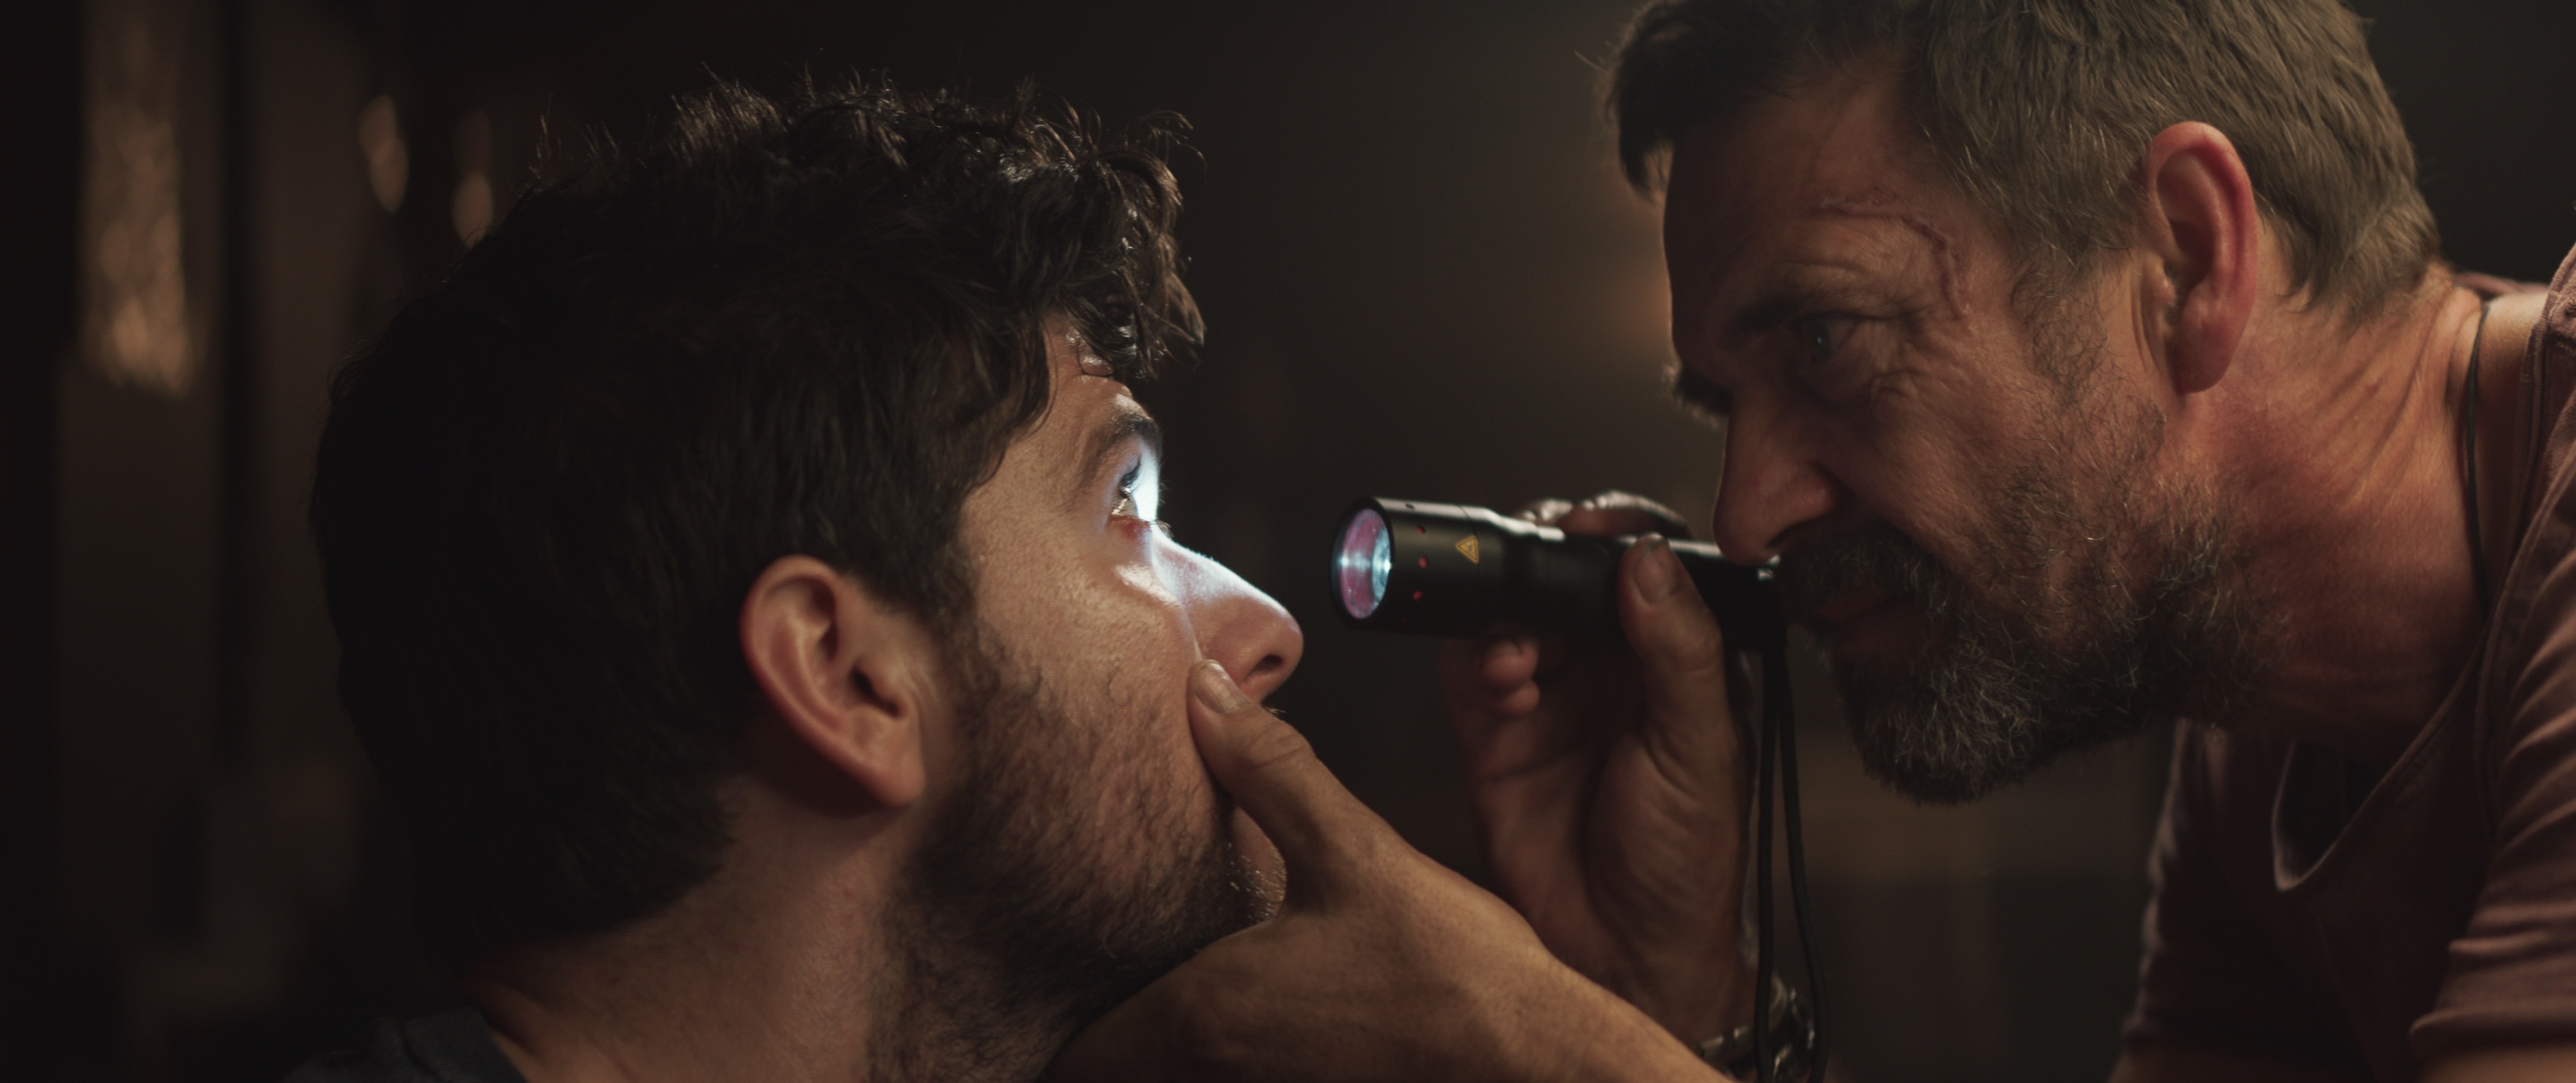 One grim looking-man shines a flashlight into another’s eyes while examining him for parasitic contagion in the horror movie Sea Fever.